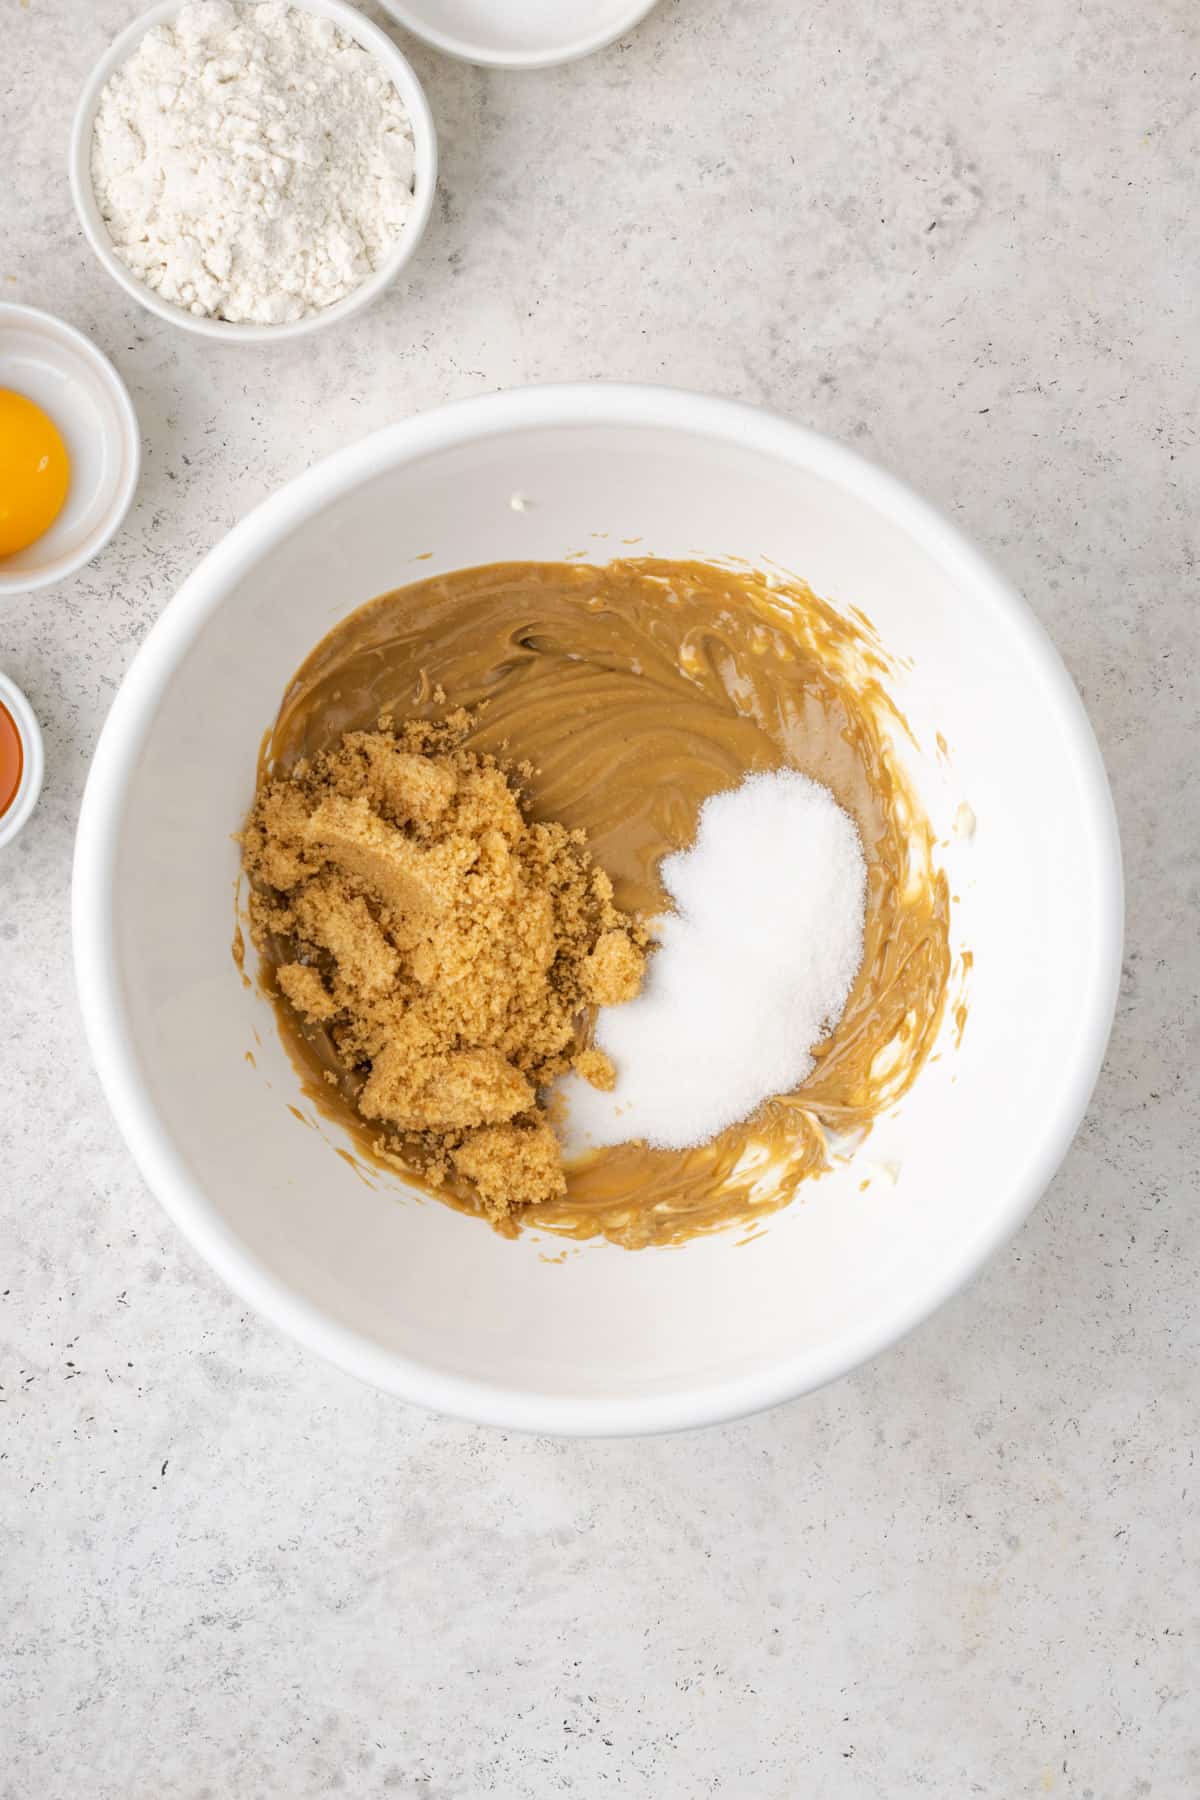 Sugar and brown sugar added to the peanut butter mixture in a large mixing bowl.